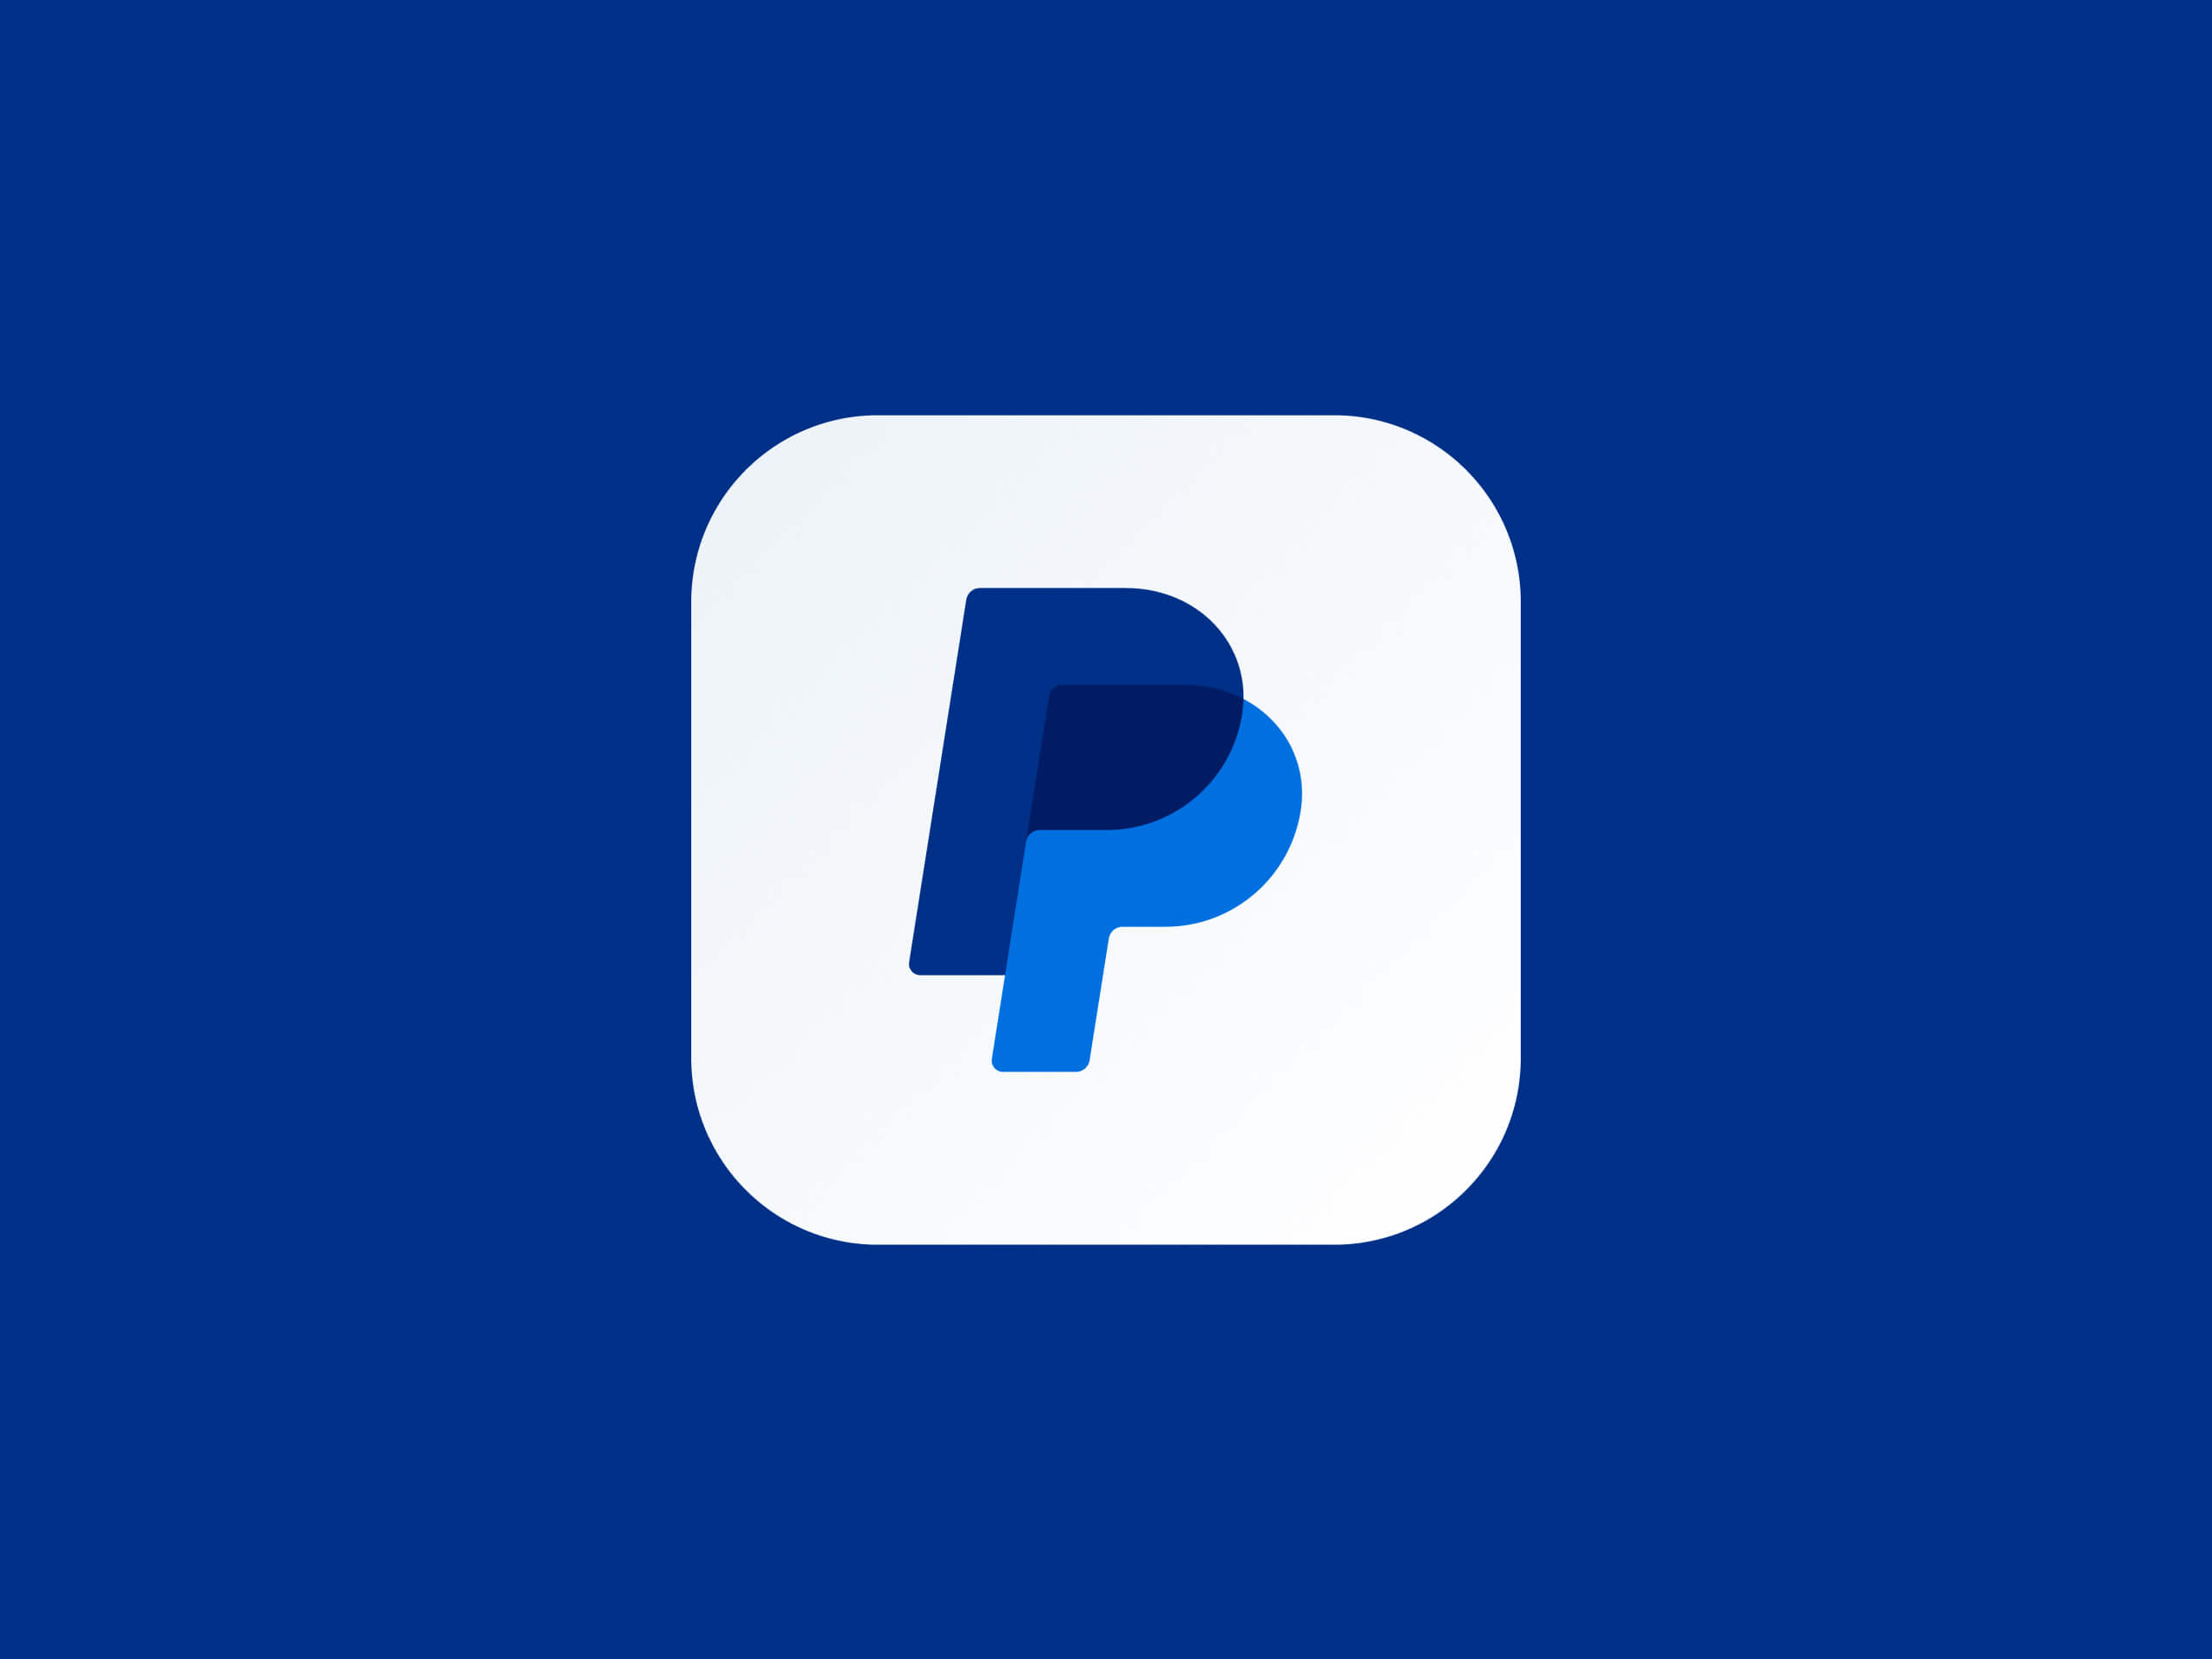 https://www.paypalobjects.com/marketing/web/US/en/rebrand/Mobile-apps/mobile-apps--card-content--pp-business--for=all.jpg